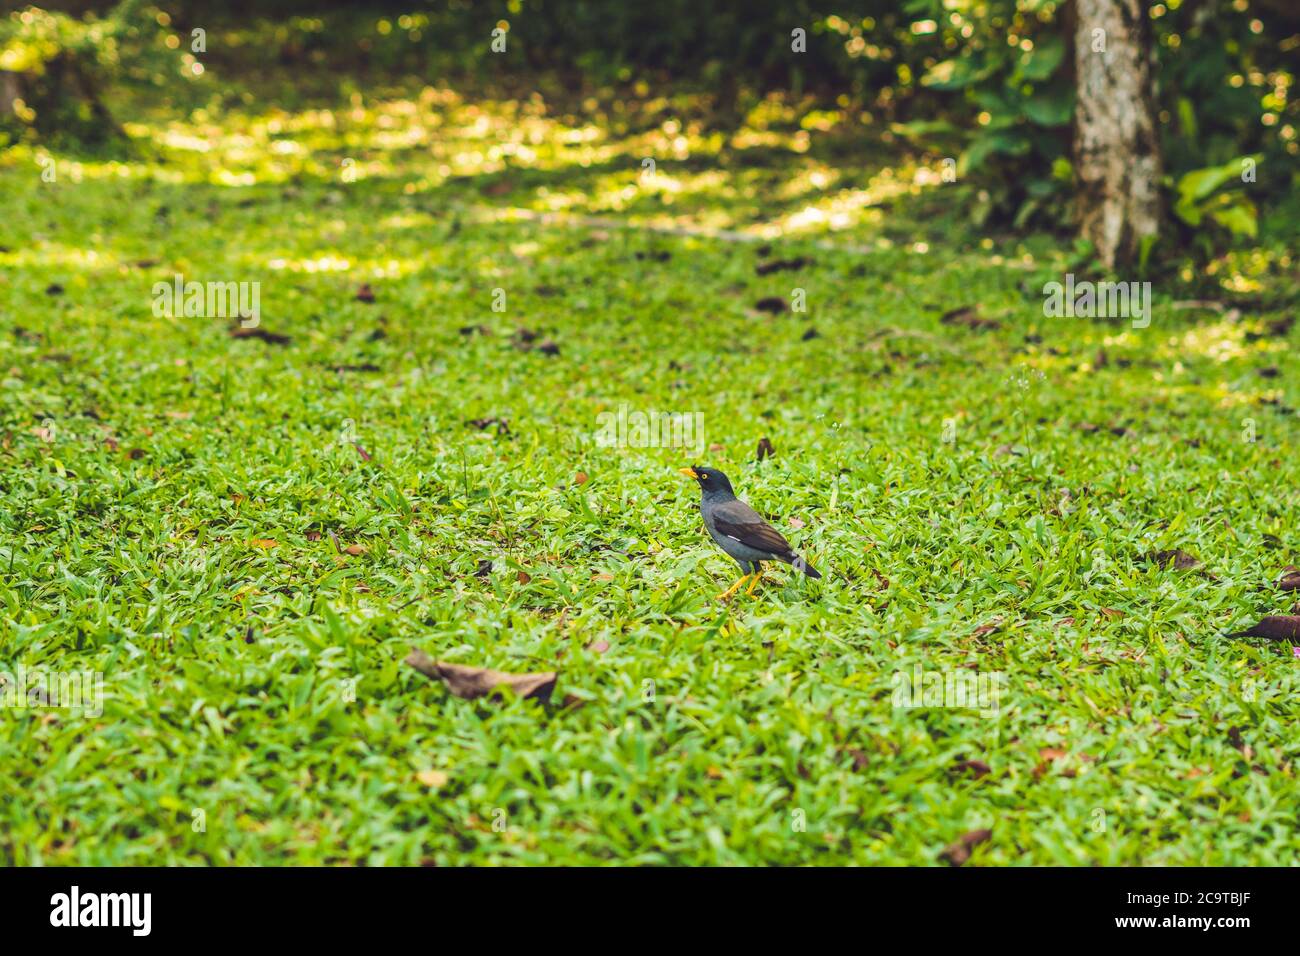 The bird with yellow legs and a yellow beak on a green lawn Stock Photo